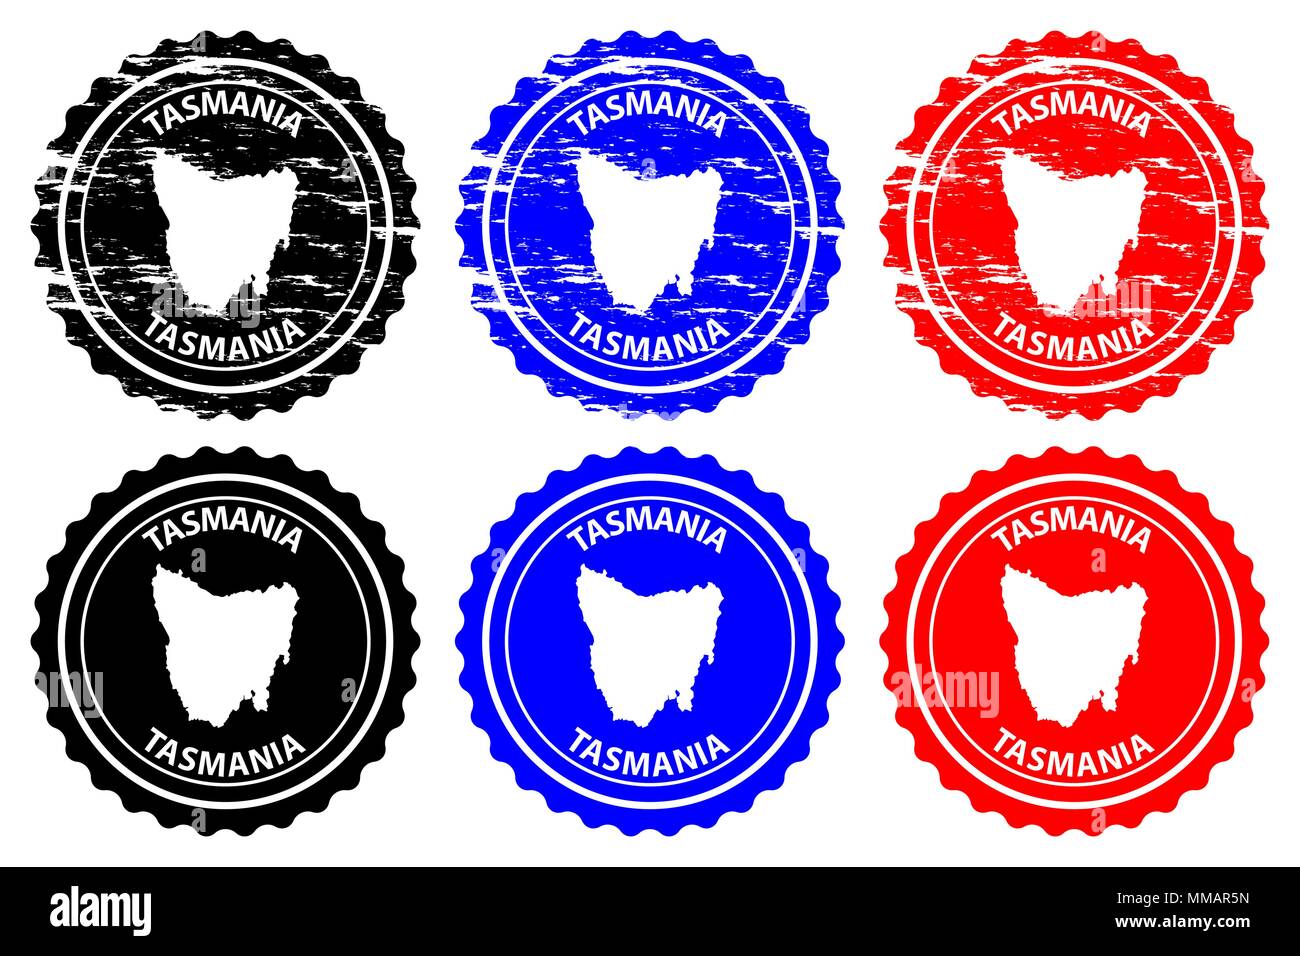 Tasmania - rubber stamp - vector, Tasmania map pattern - sticker - black, blue and red Stock Vector